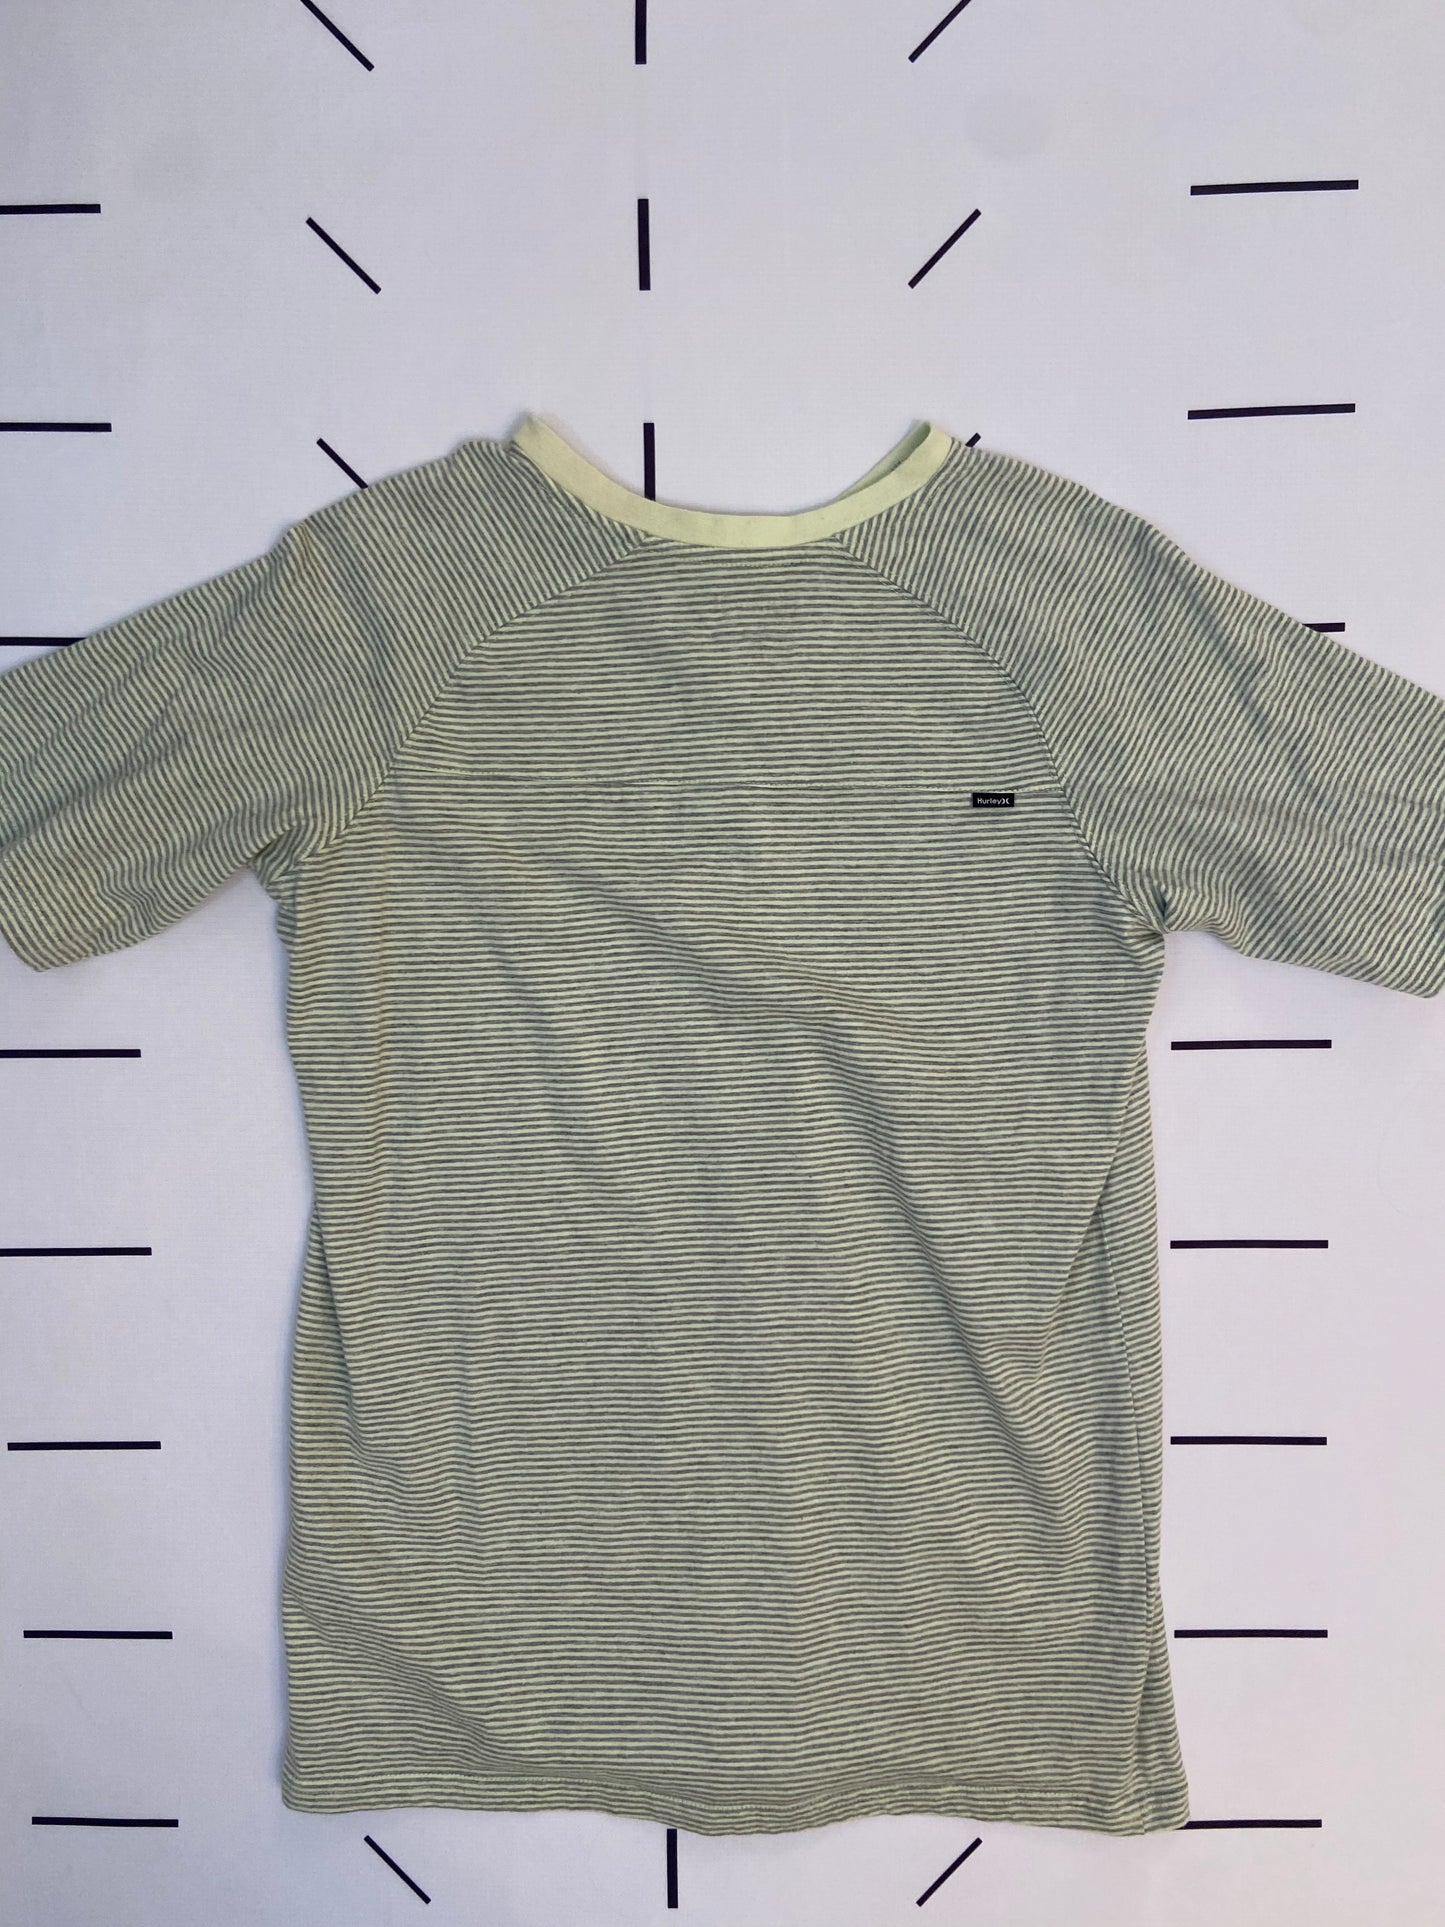 Pastel Yellow Half Button up Tee- Youth XL